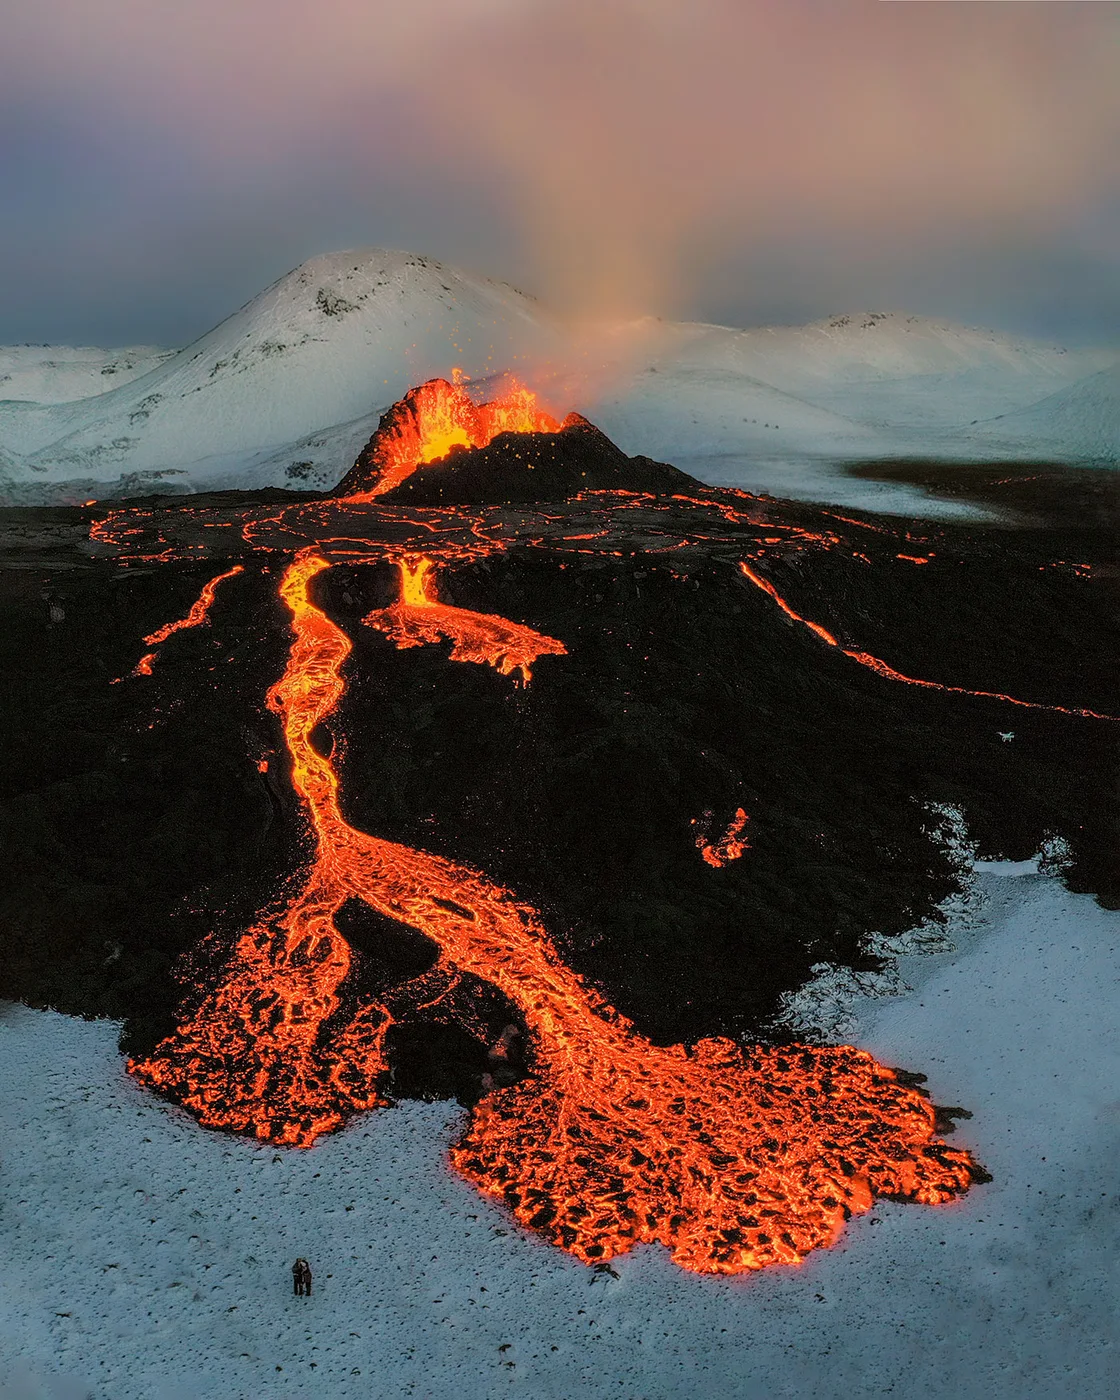 Stunning Photography from an erupting Volcano in Iceland